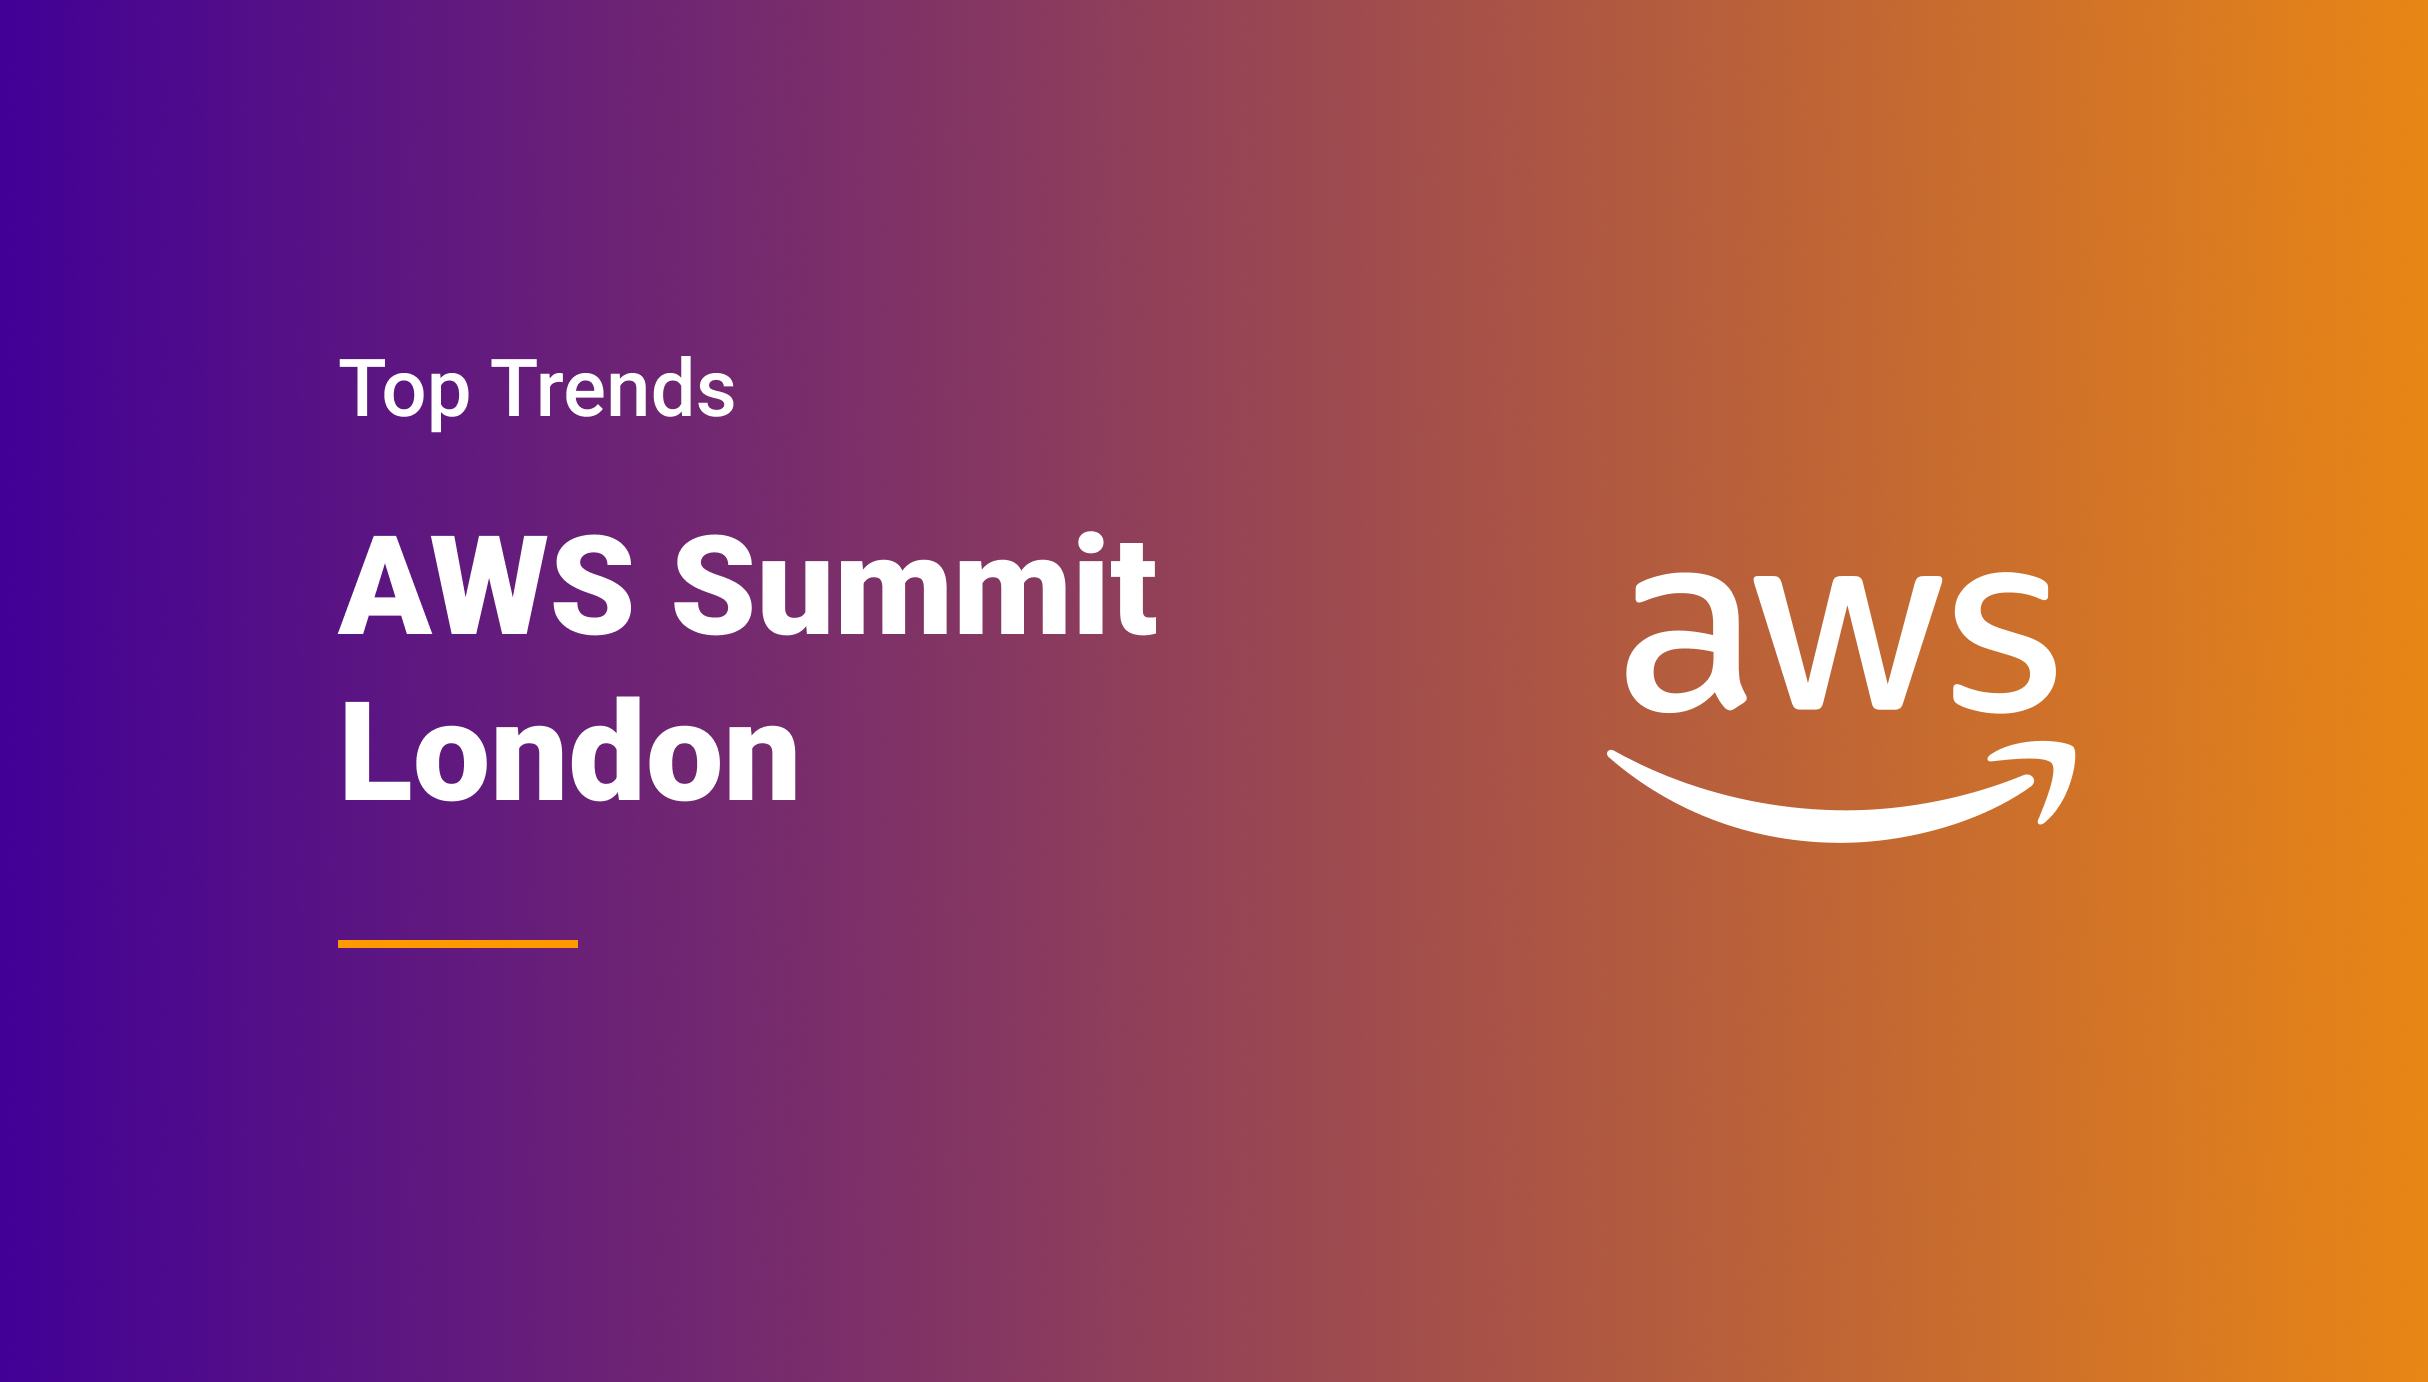 Top Trends of the AWS Summit London